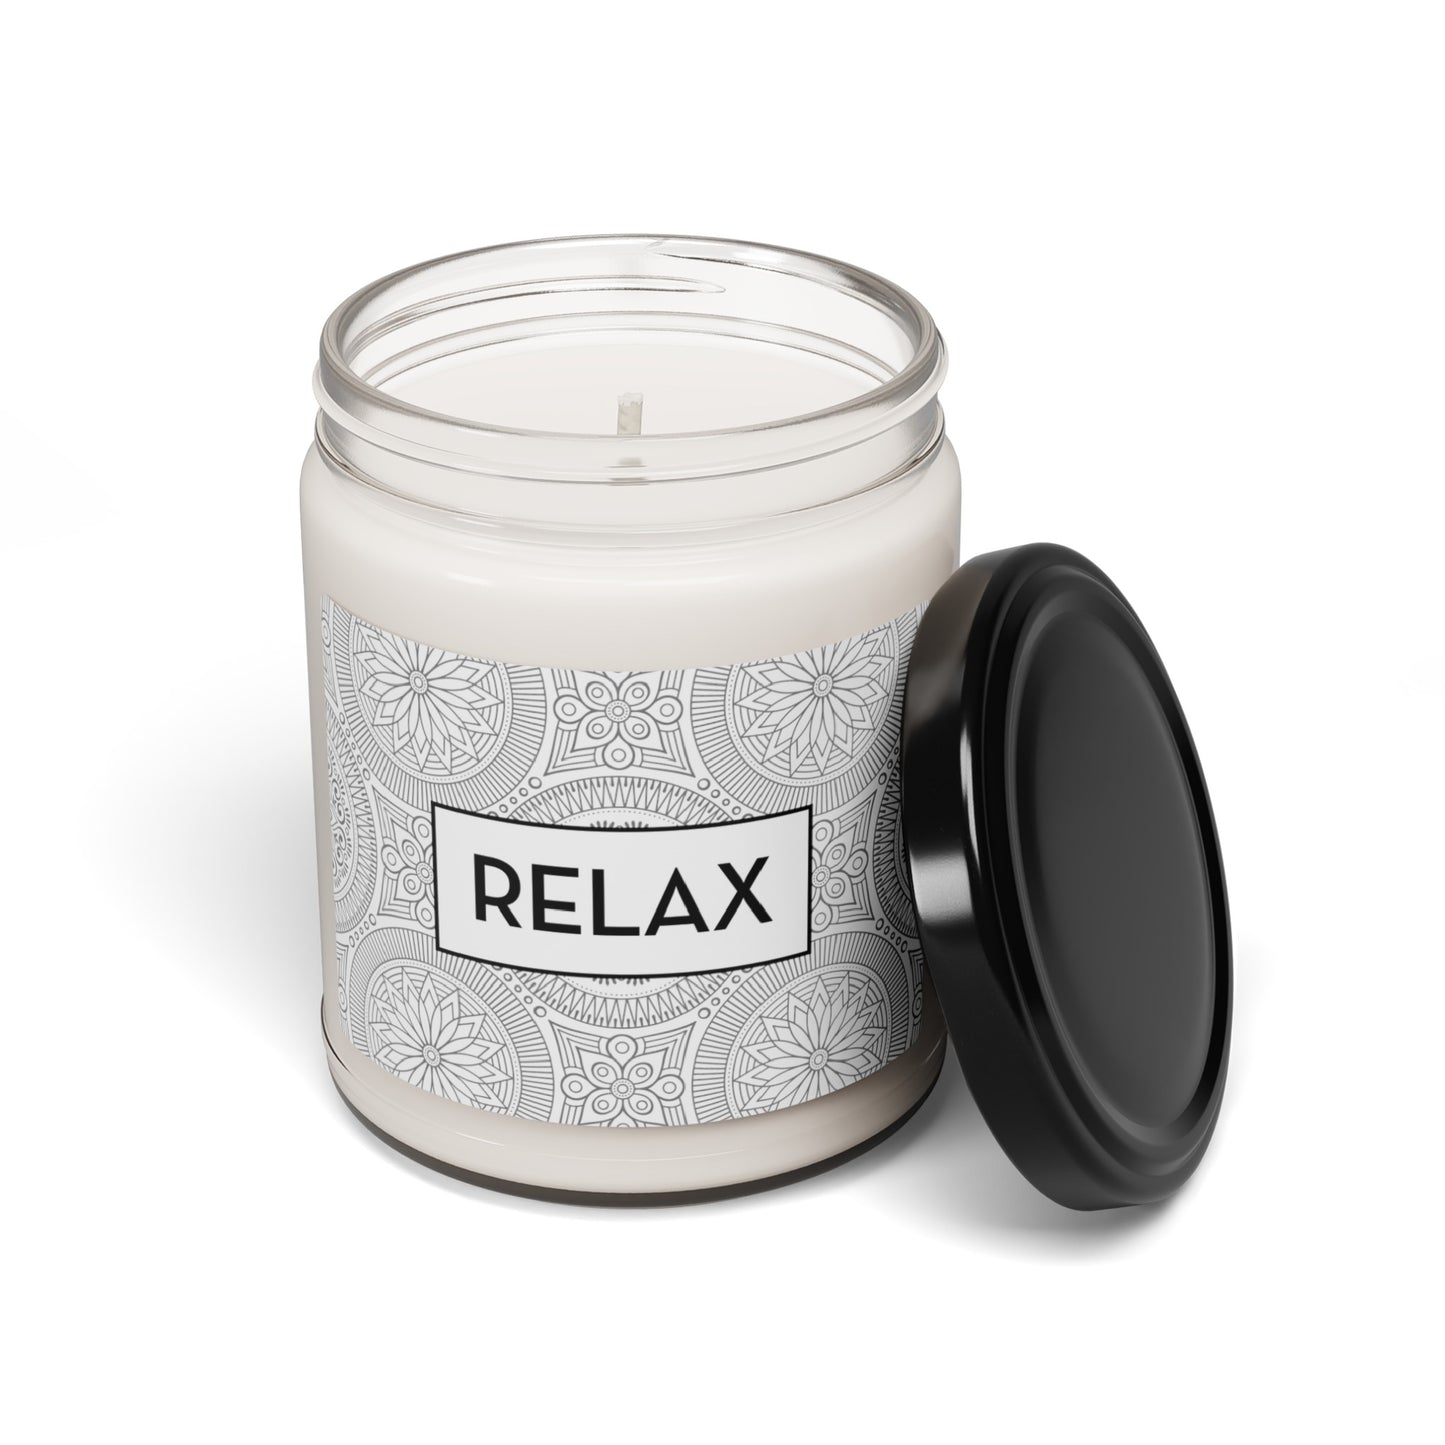 RELAX Vegan Soy Scented Candle, 9oz